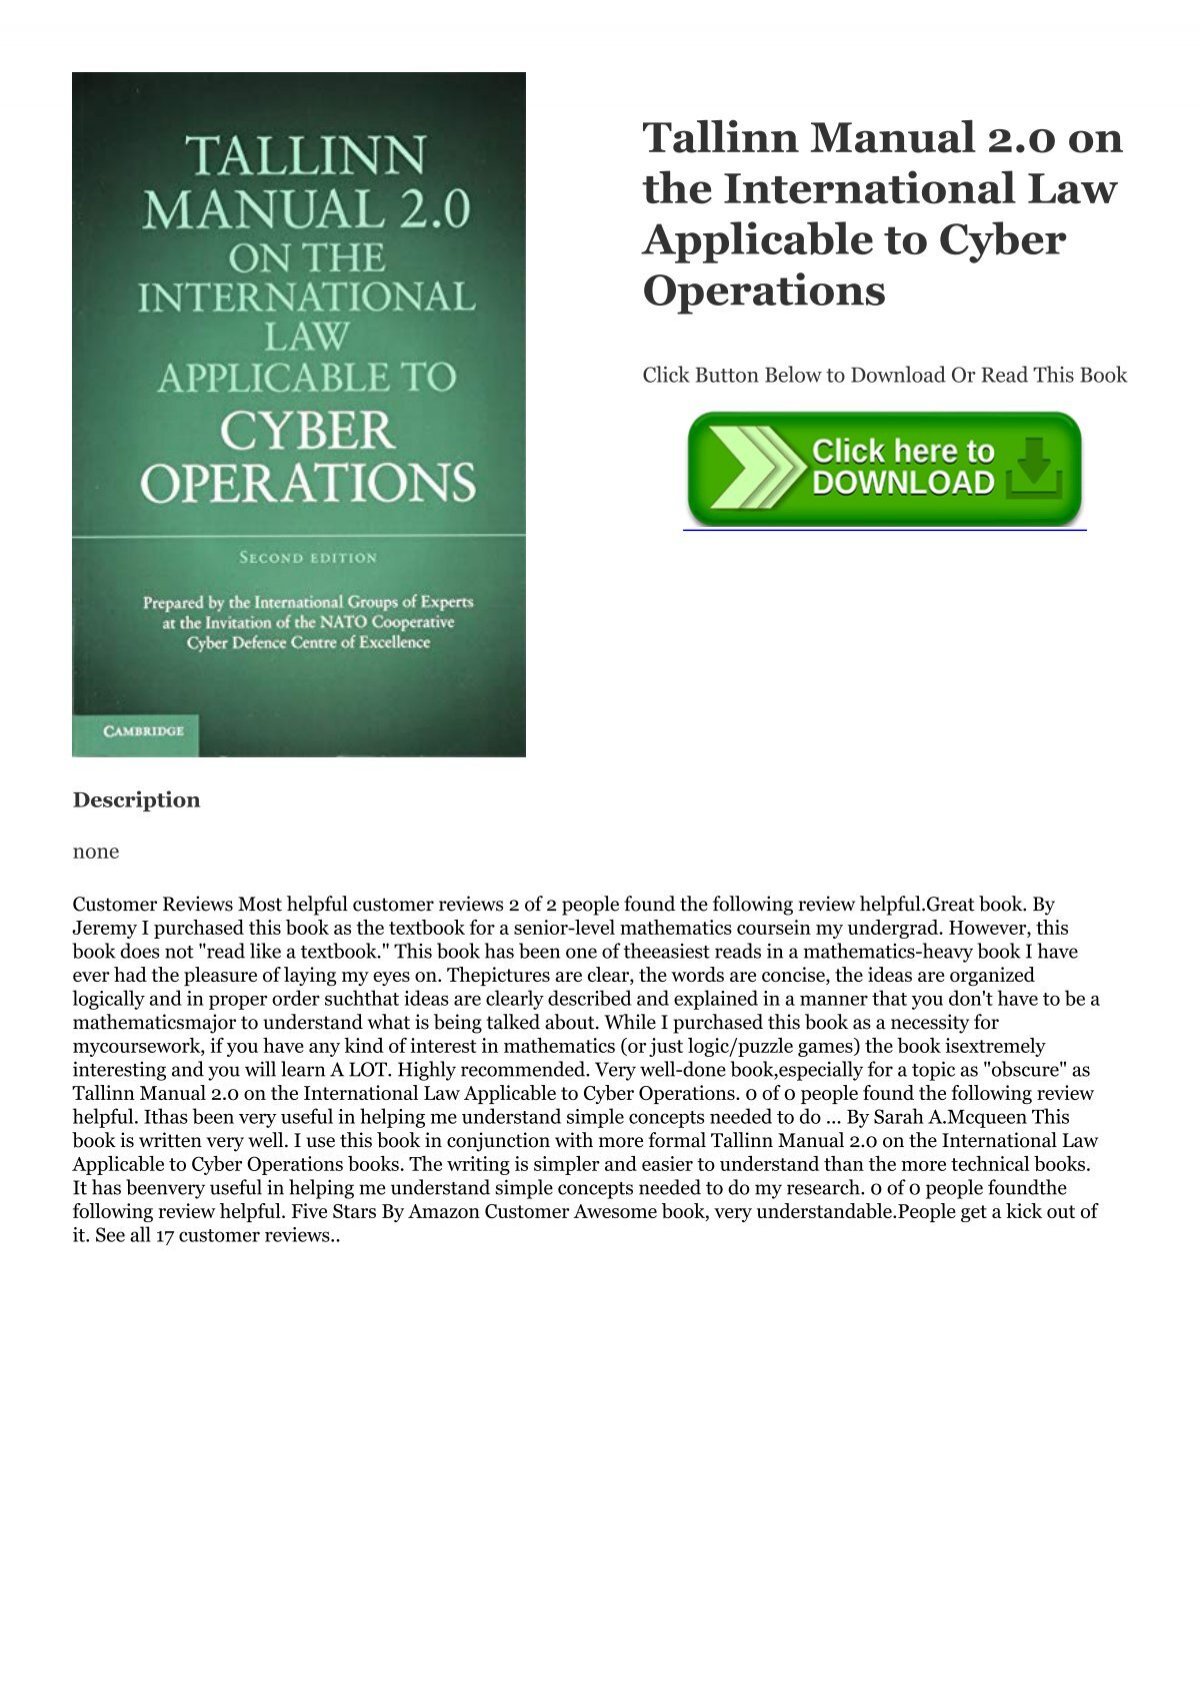 Read Online Tallinn Manual 2 0 On The International Law Applicable To Cyber Operations Pdf